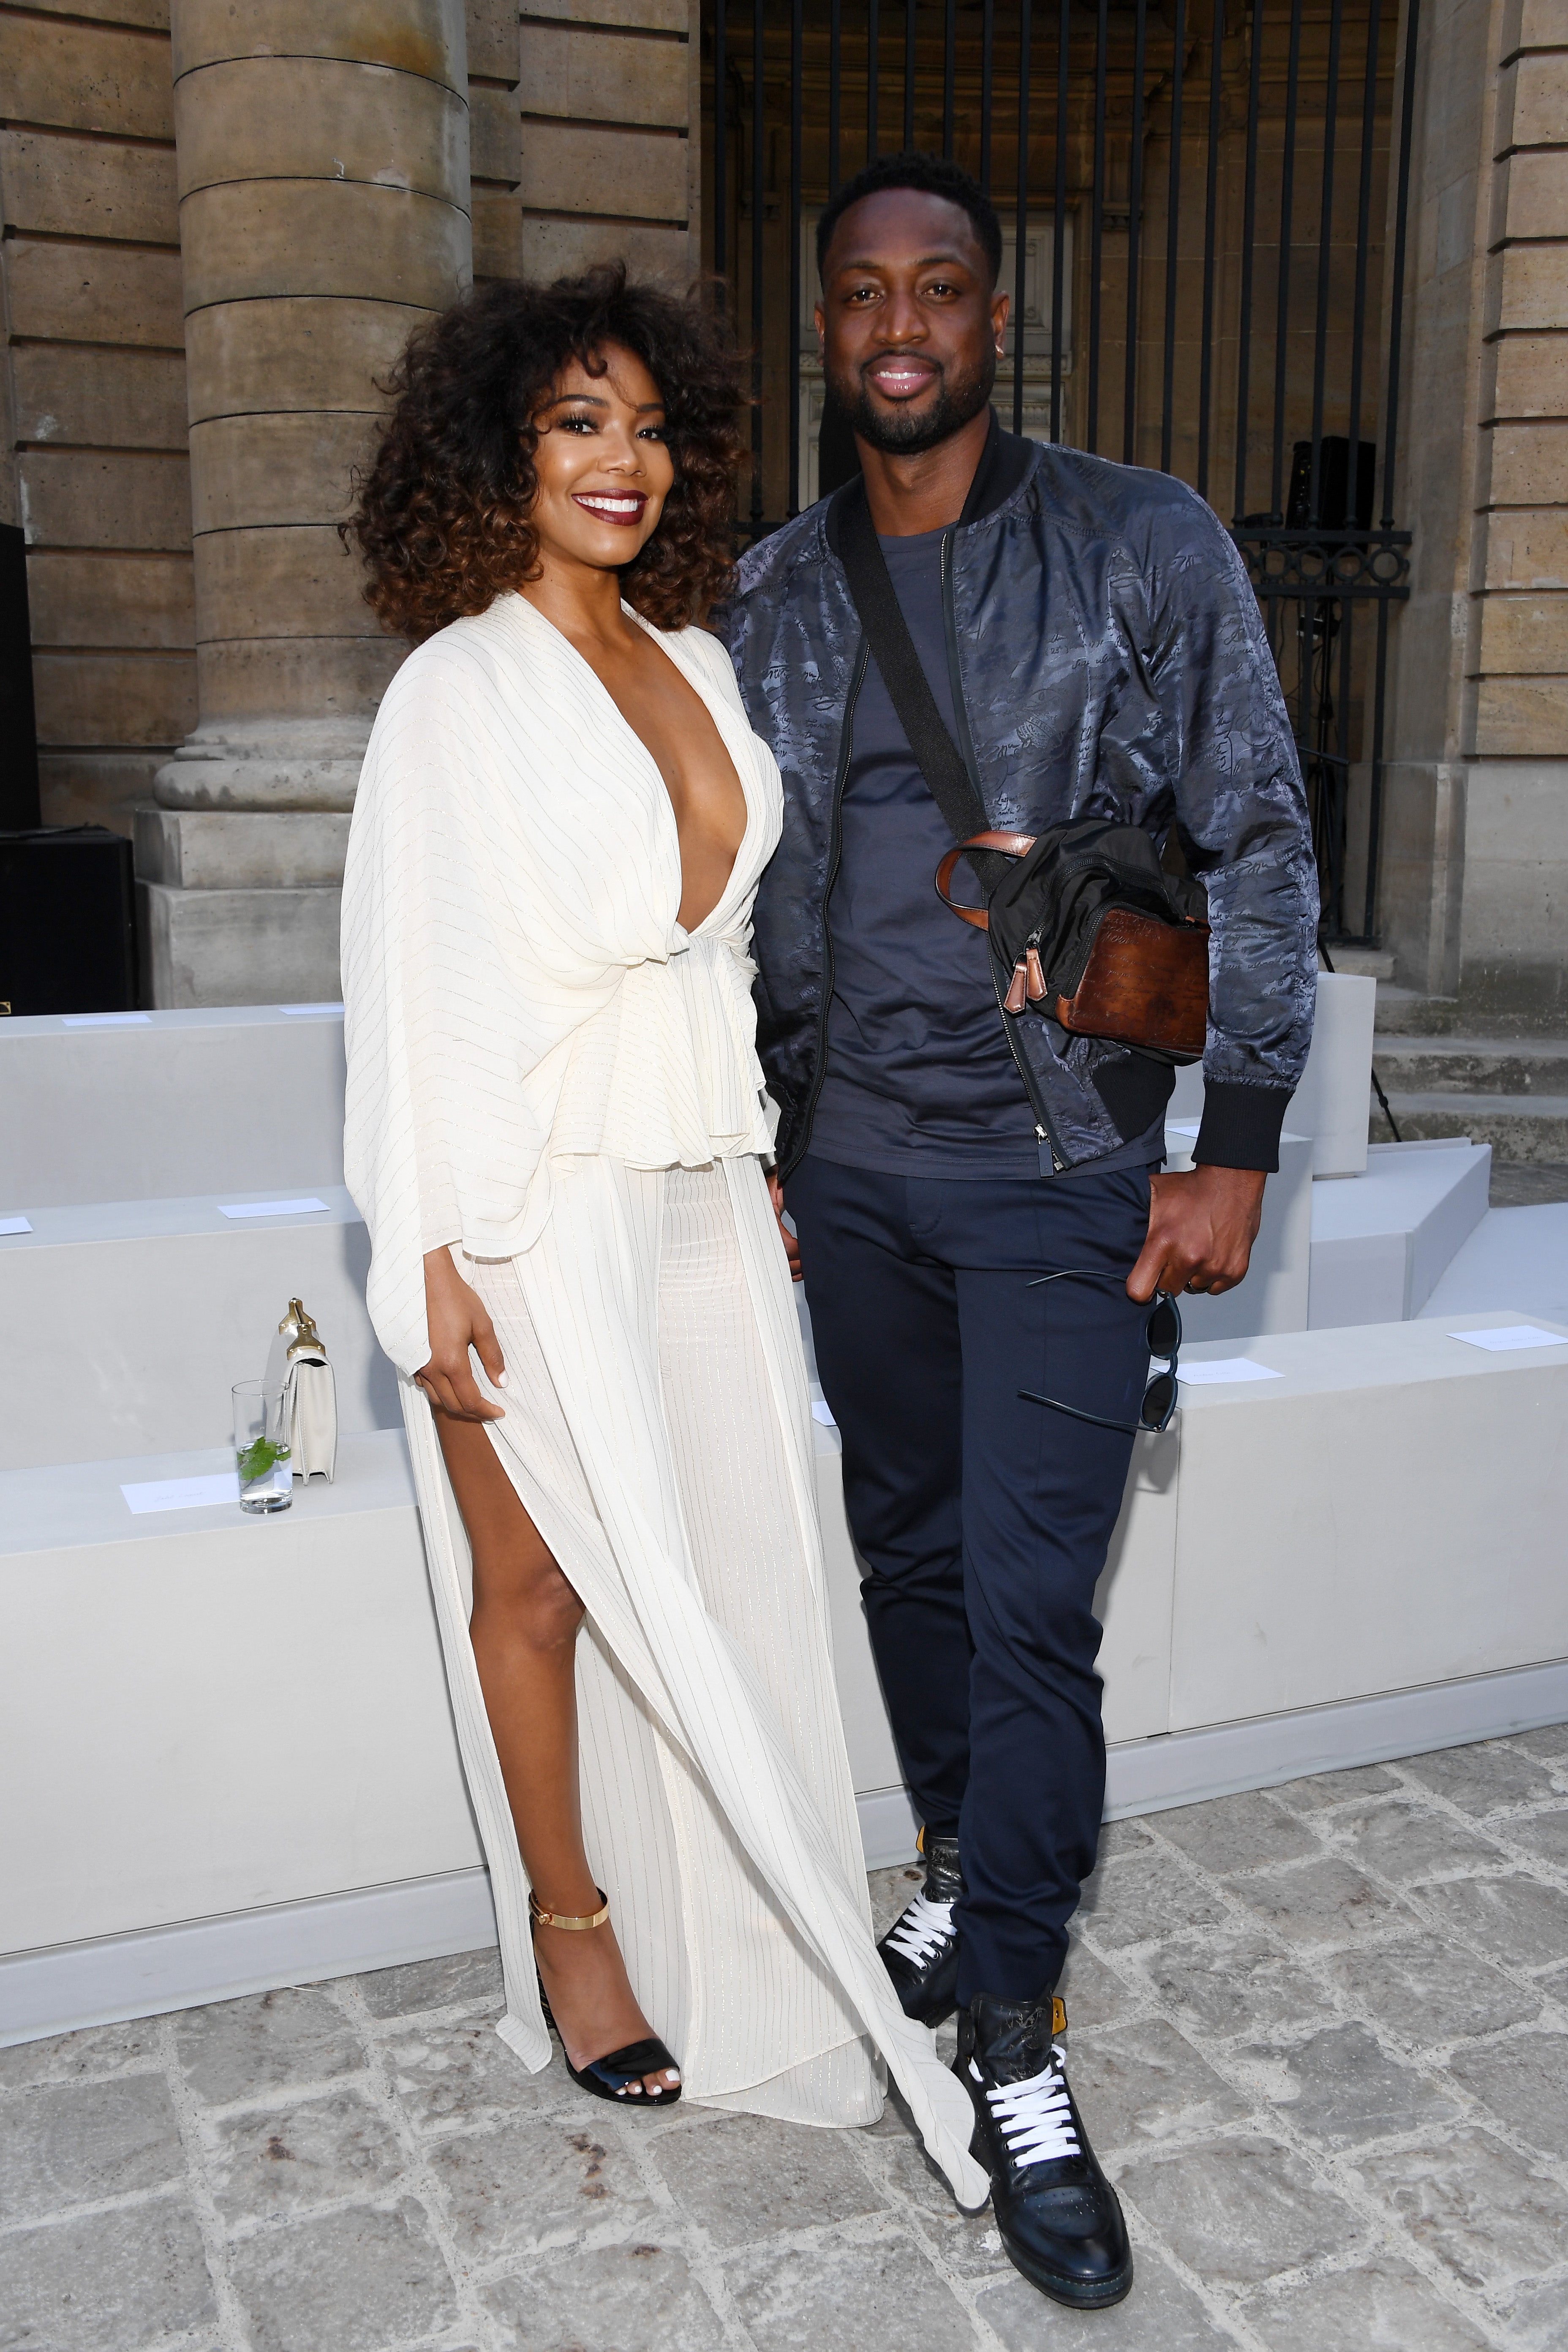 ICYMI: We're Still Obsessed With Gabrielle Union And Dwyane Wade's European Vacation Photos
